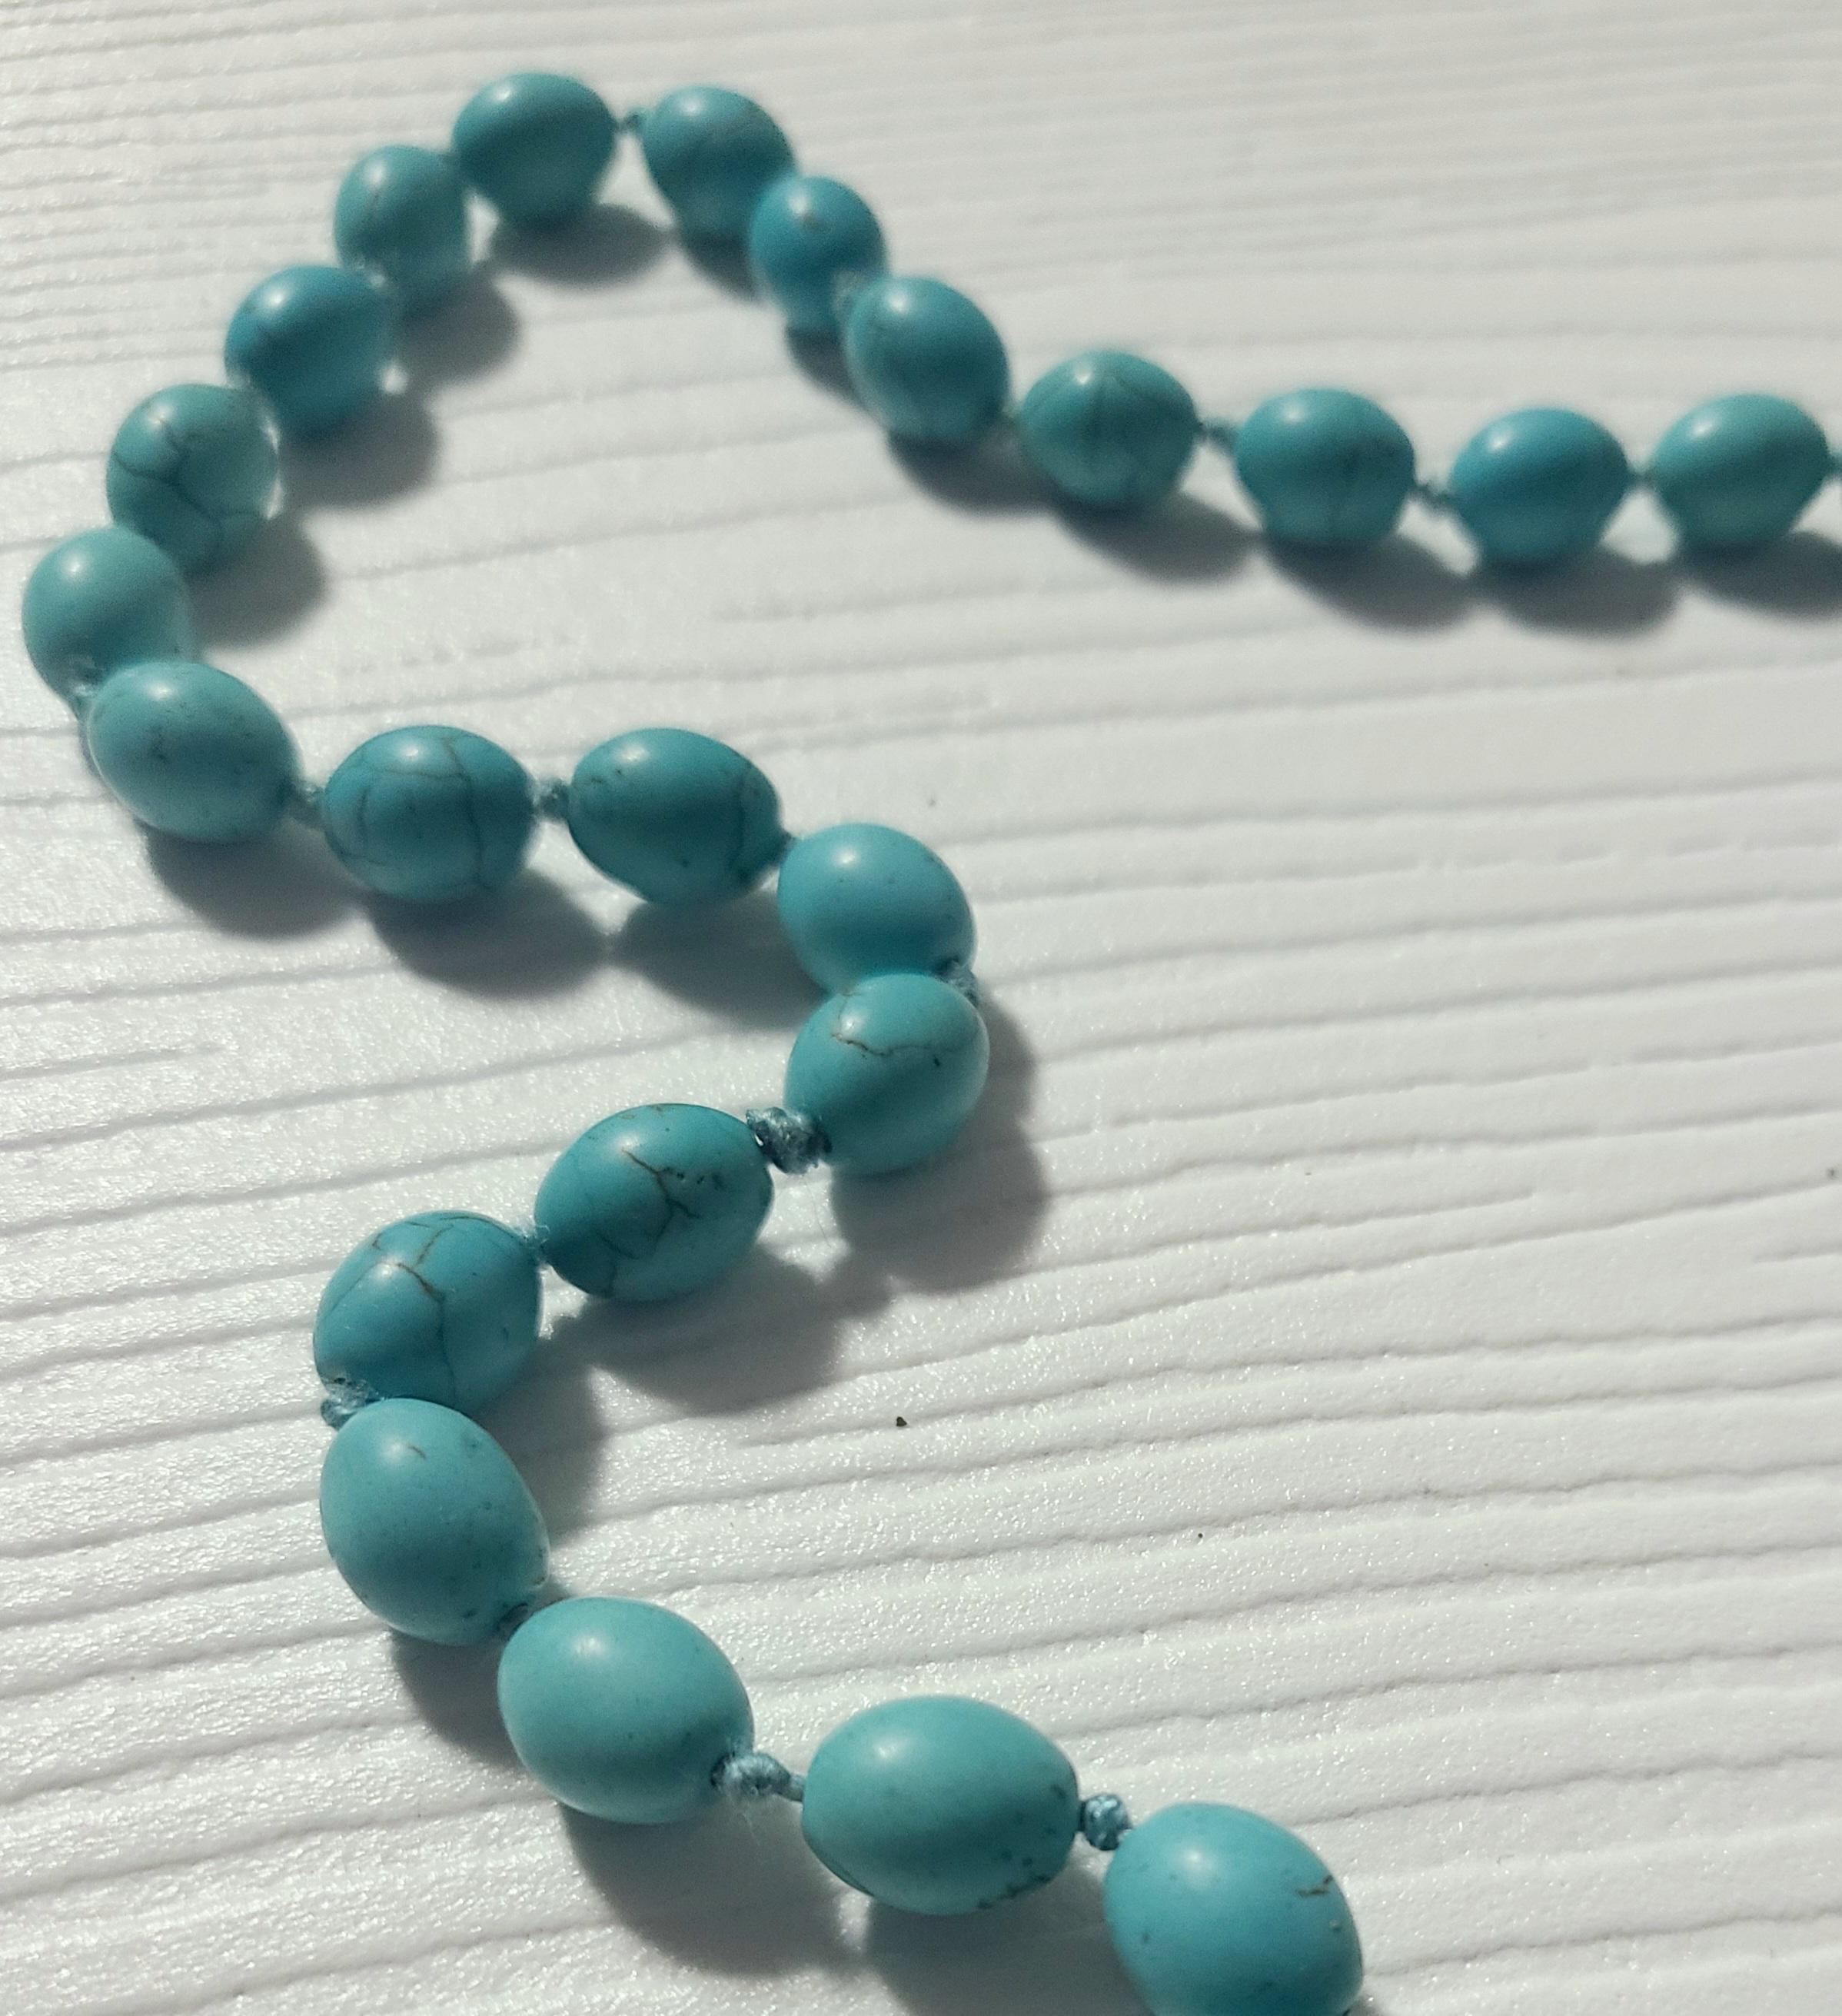 1970s Matte Robin's Egg Blue Turquoise Oval Bead Necklace In Excellent Condition For Sale In Maywood, NJ